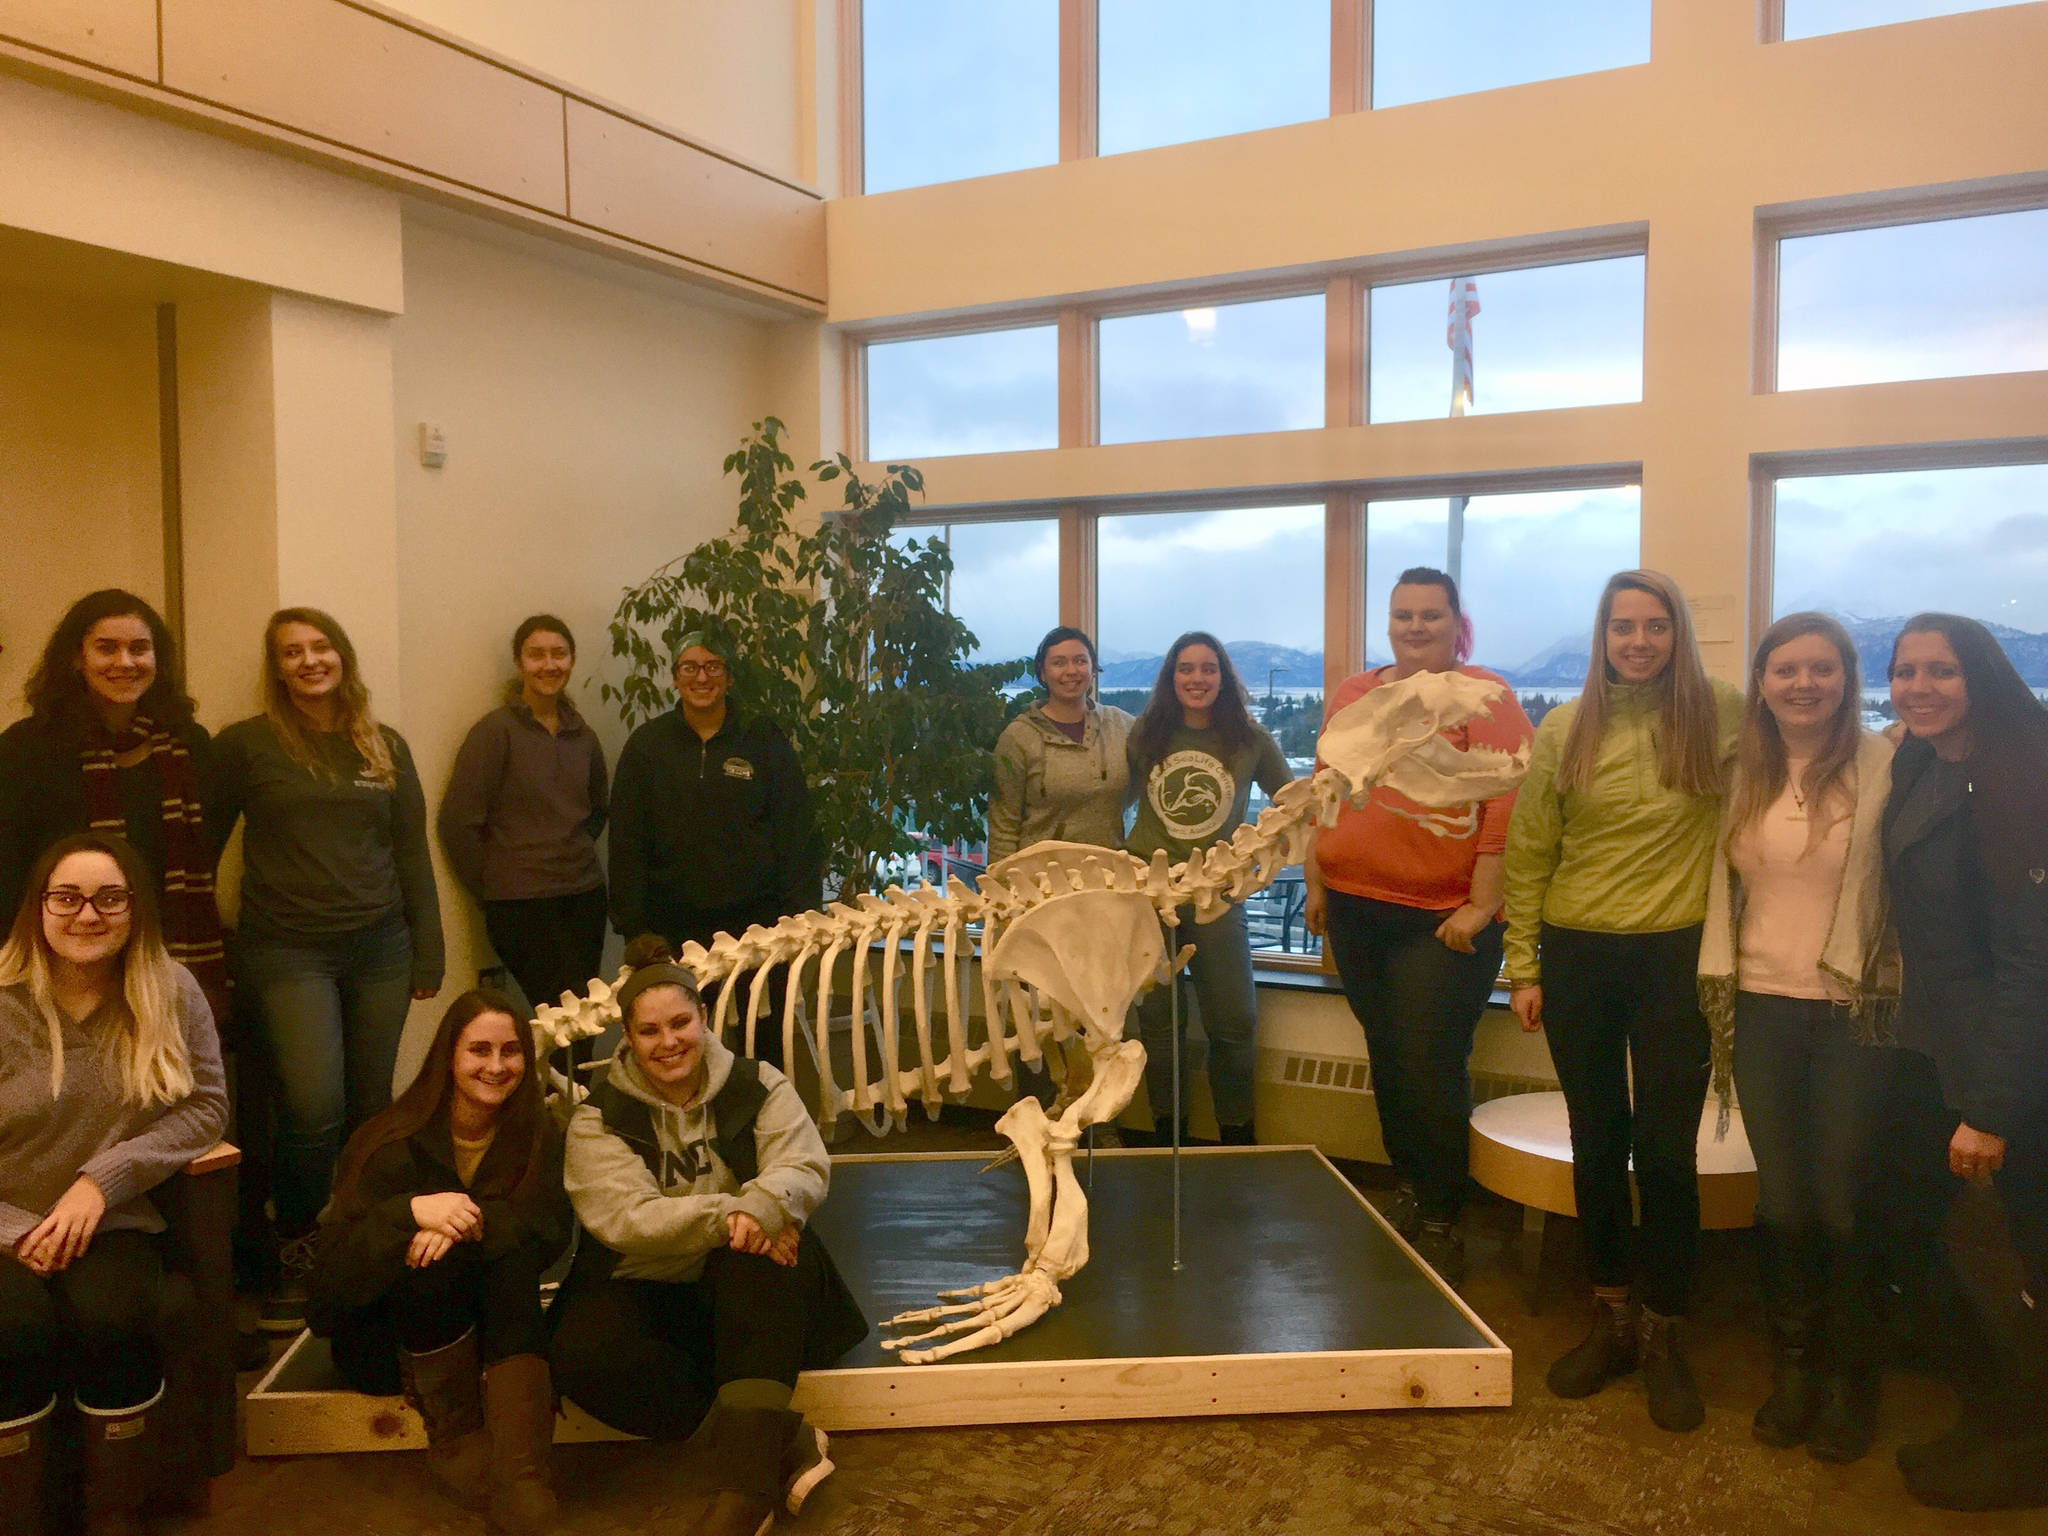 Several Semester by the Bay students pose with Woody on Tuesday, Nov. 28, 2017 at Kachemak Bay Campus in Homer, Alaska. Woody is the large, male Stellar sea lion whose skeleton SBB students articulated for Lee Post’s Skeletal Articulation course this fall. The students are, front row, left to right, Sara Coble, Alyssa Weber, Casey Marker; back row, left to right, Annaliese Dorante, Jade Vipond, Krista Laforest, Rachel Price, Jessica Gribble, Nicole Webster, Zobeida Rudkin, Isabel Jamerson, Emily Grose and Megan Gallagher. (Photo by Delcenia Cosman)